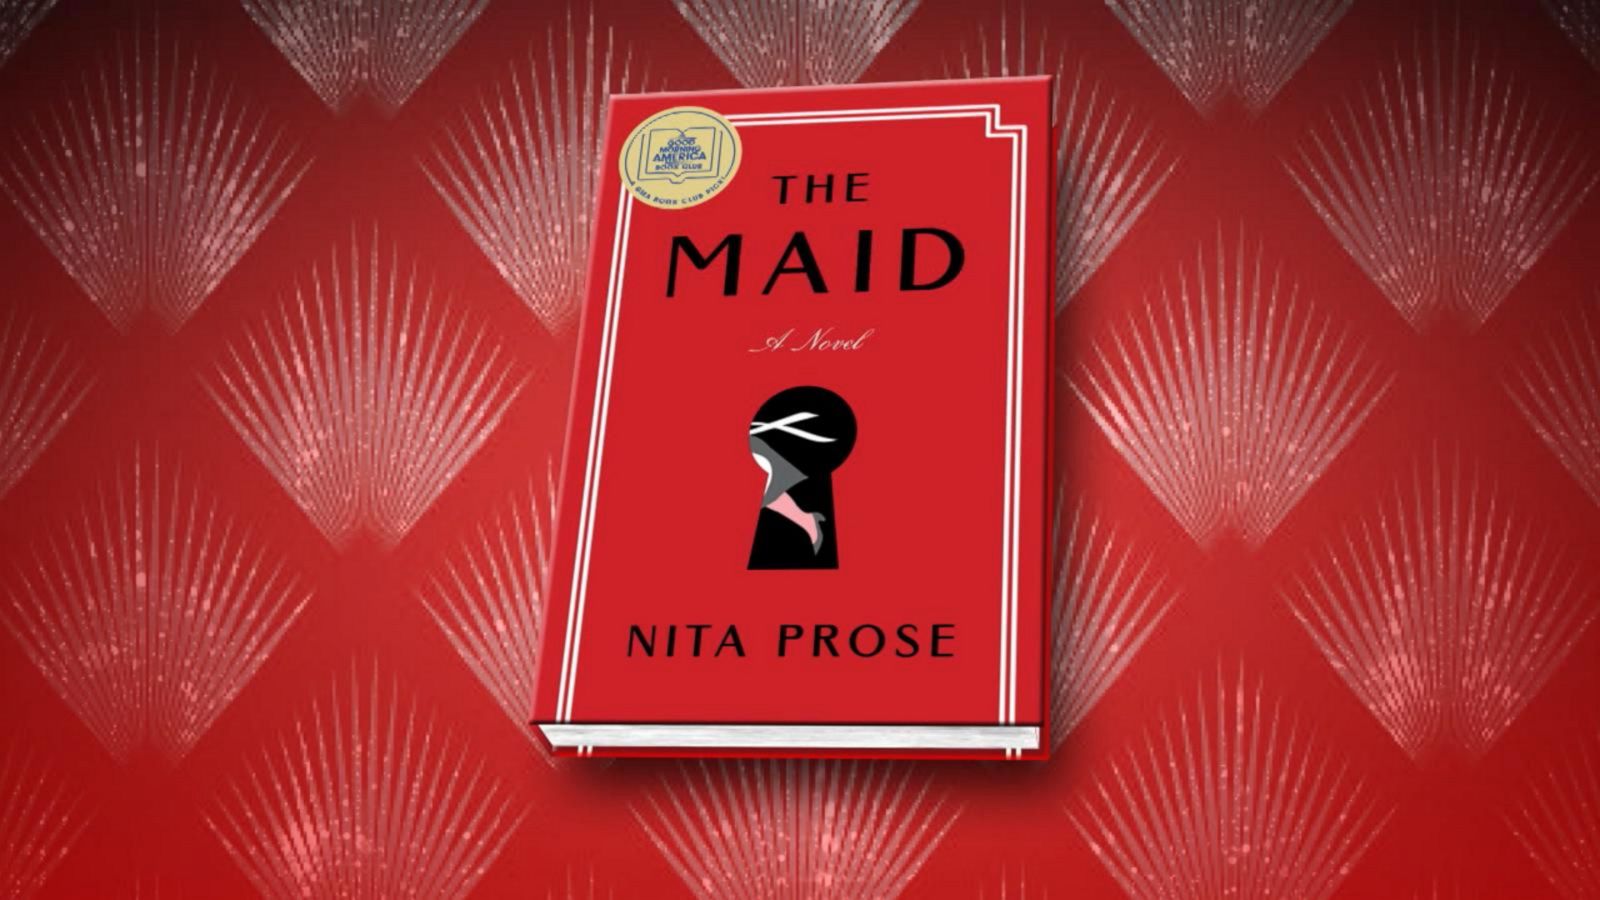 'The Maid' by Nita Prose is 'GMA's' Book Club pick for January Good